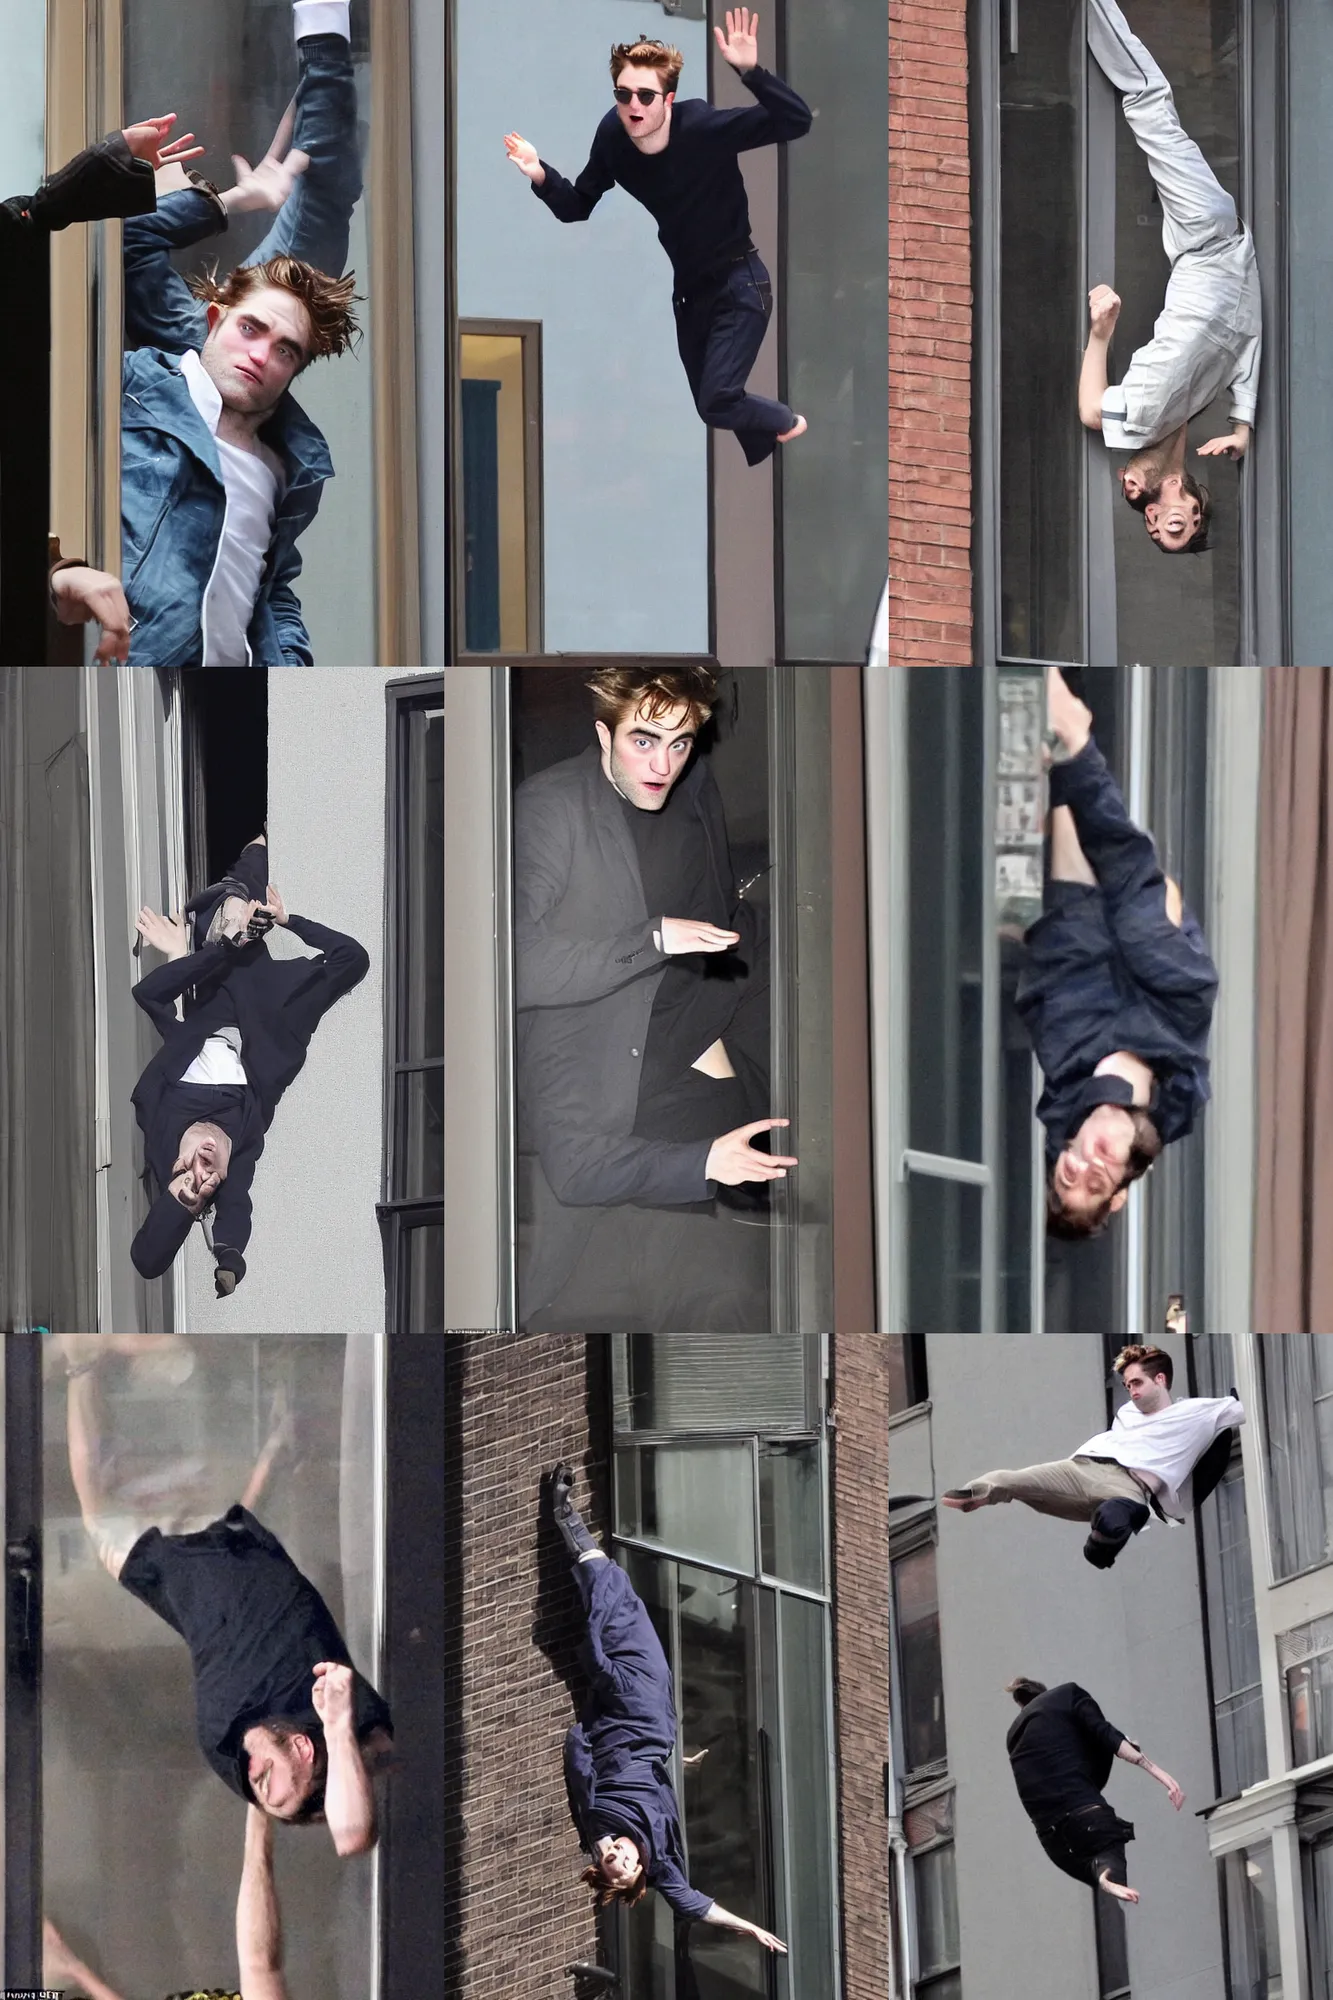 Prompt: robert pattinson's unconscious body flying through apartment window in new york city, photographed mid - air